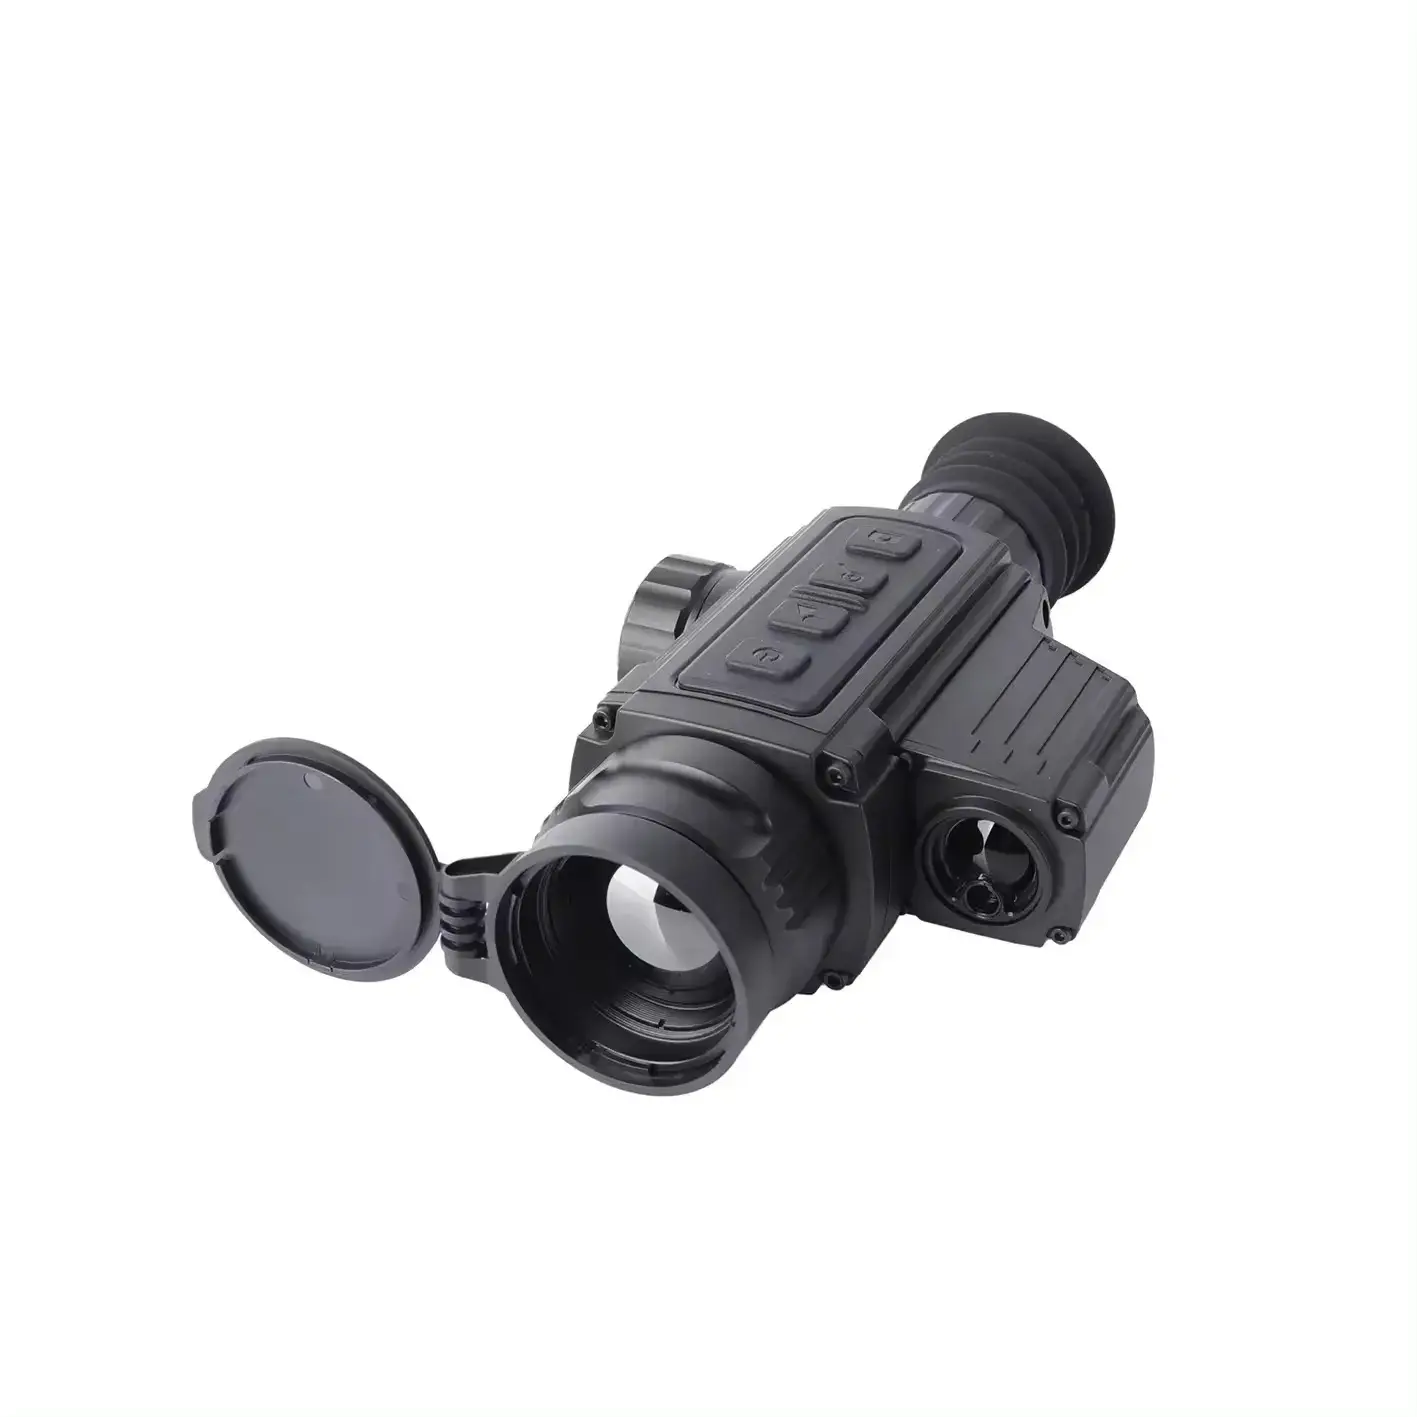 DT RS5 Series Thermal Scope